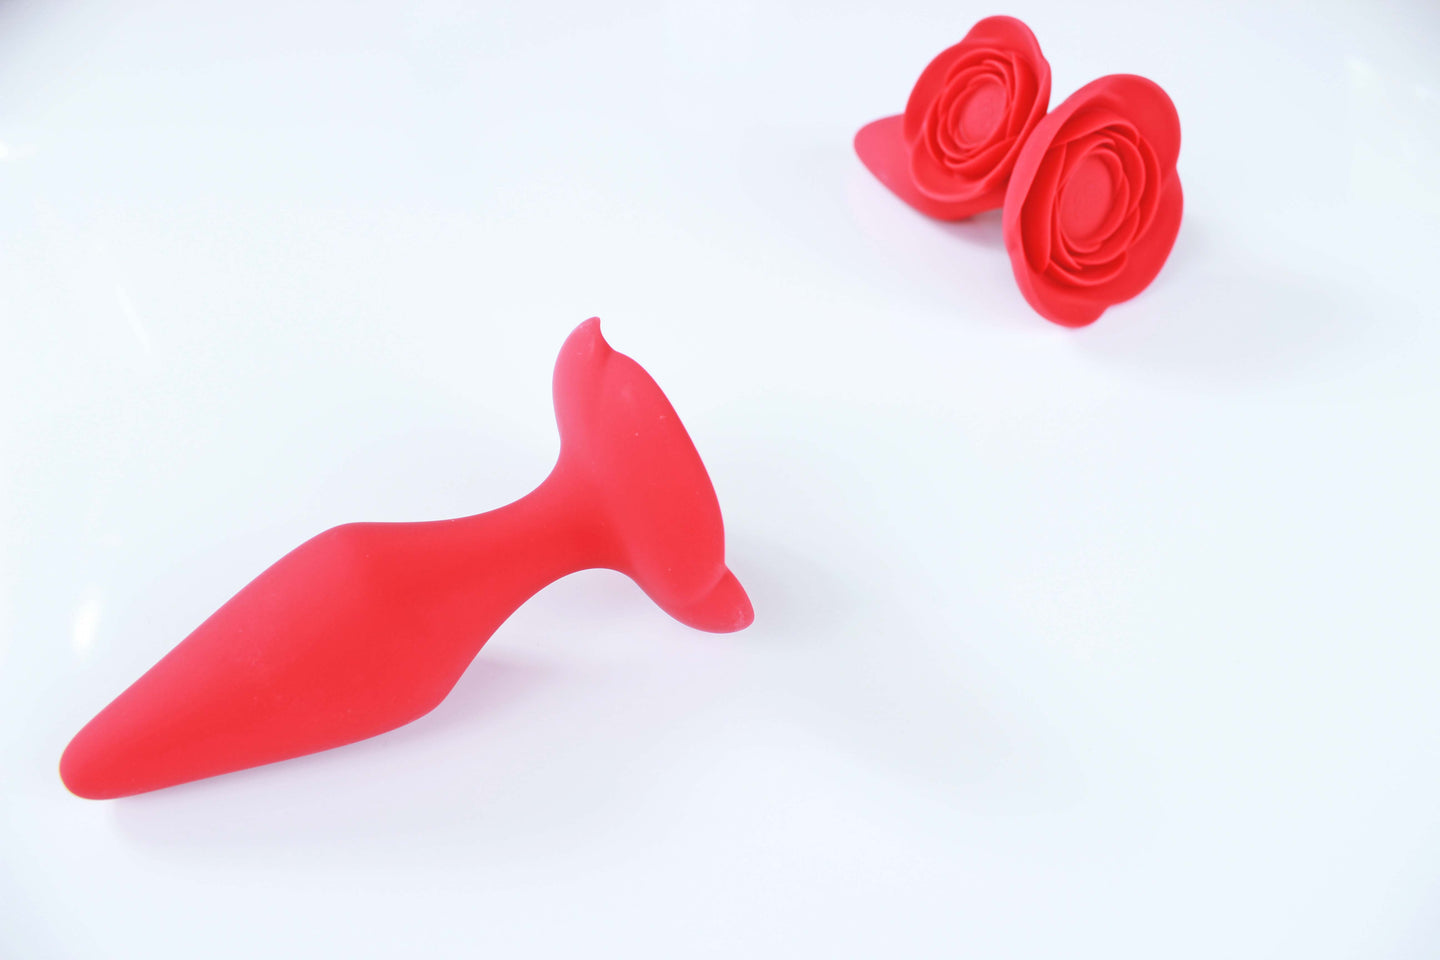 Medium red rose butt plug laid in front of small and large sizes of the same butt plug on white background